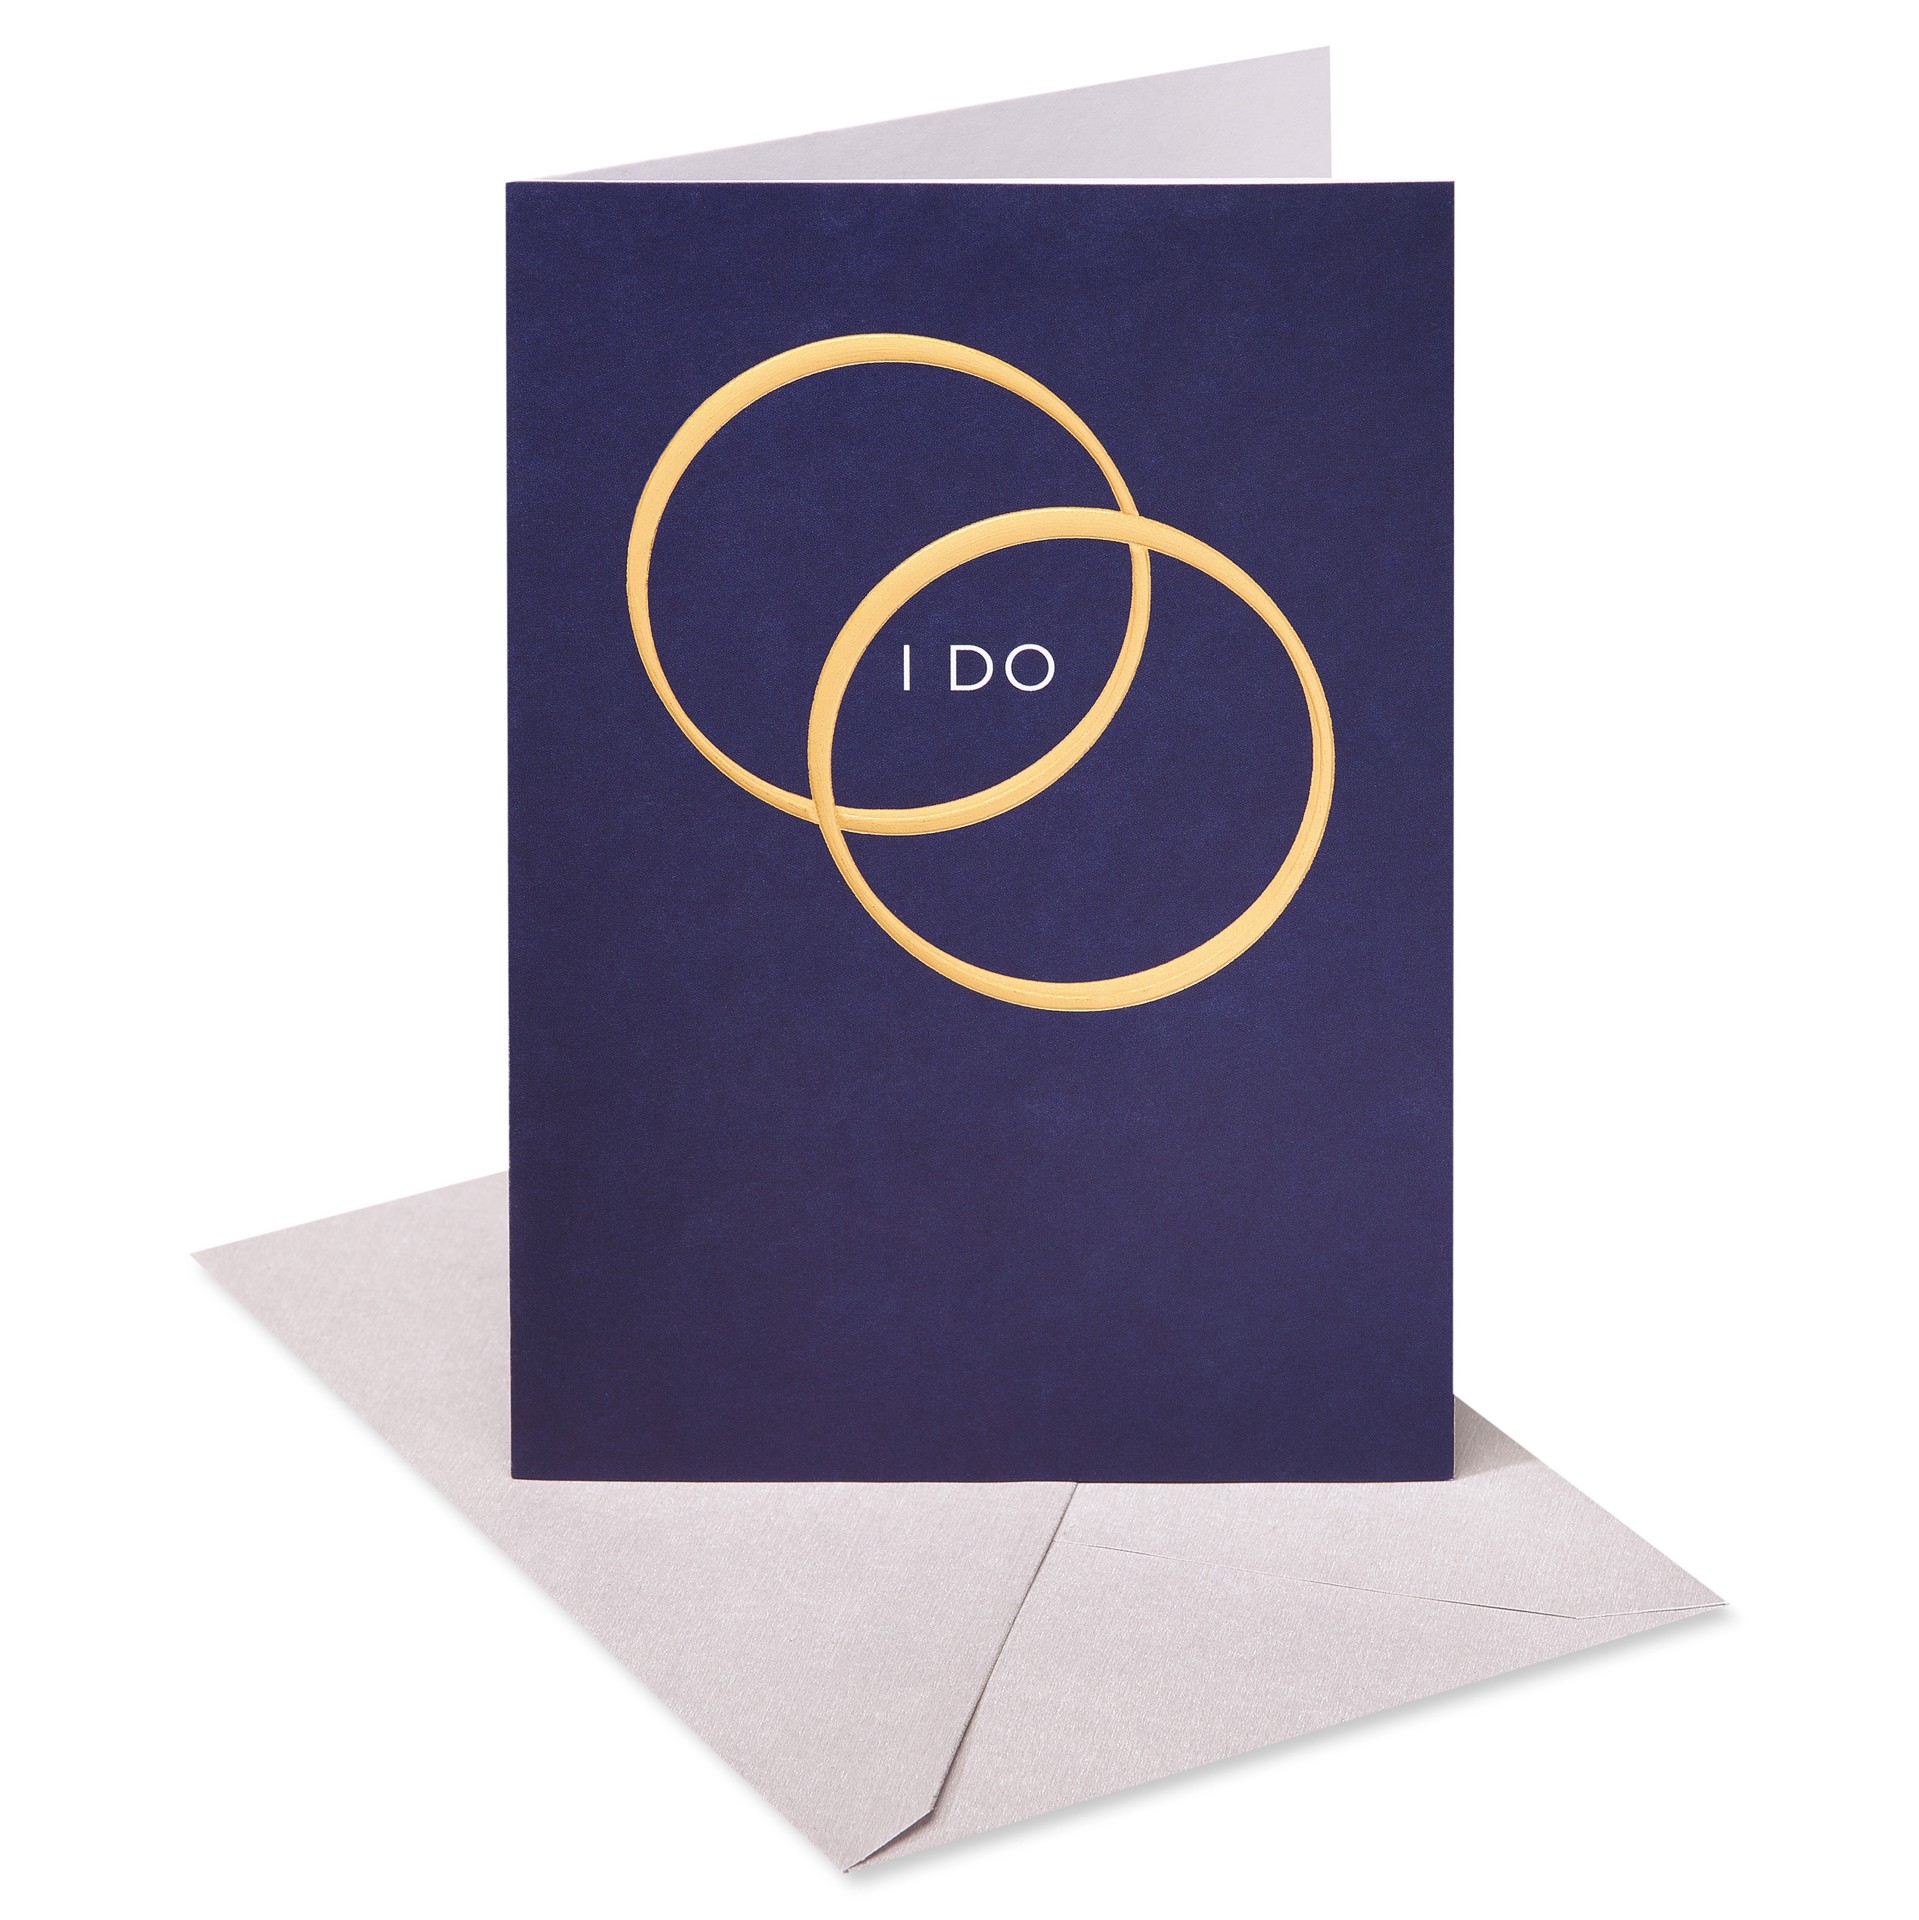 slide 1 of 9, American Greetings Ring in their new lives together with this elegant wedding card. The design features two metallic gold wedding bands on a navy blue background and the words “I DO” on the front. The inside contains simple words of congratulations for the happy couple. It's suitable for sending to any twosome on their happy day. Envelope included., 1 ct